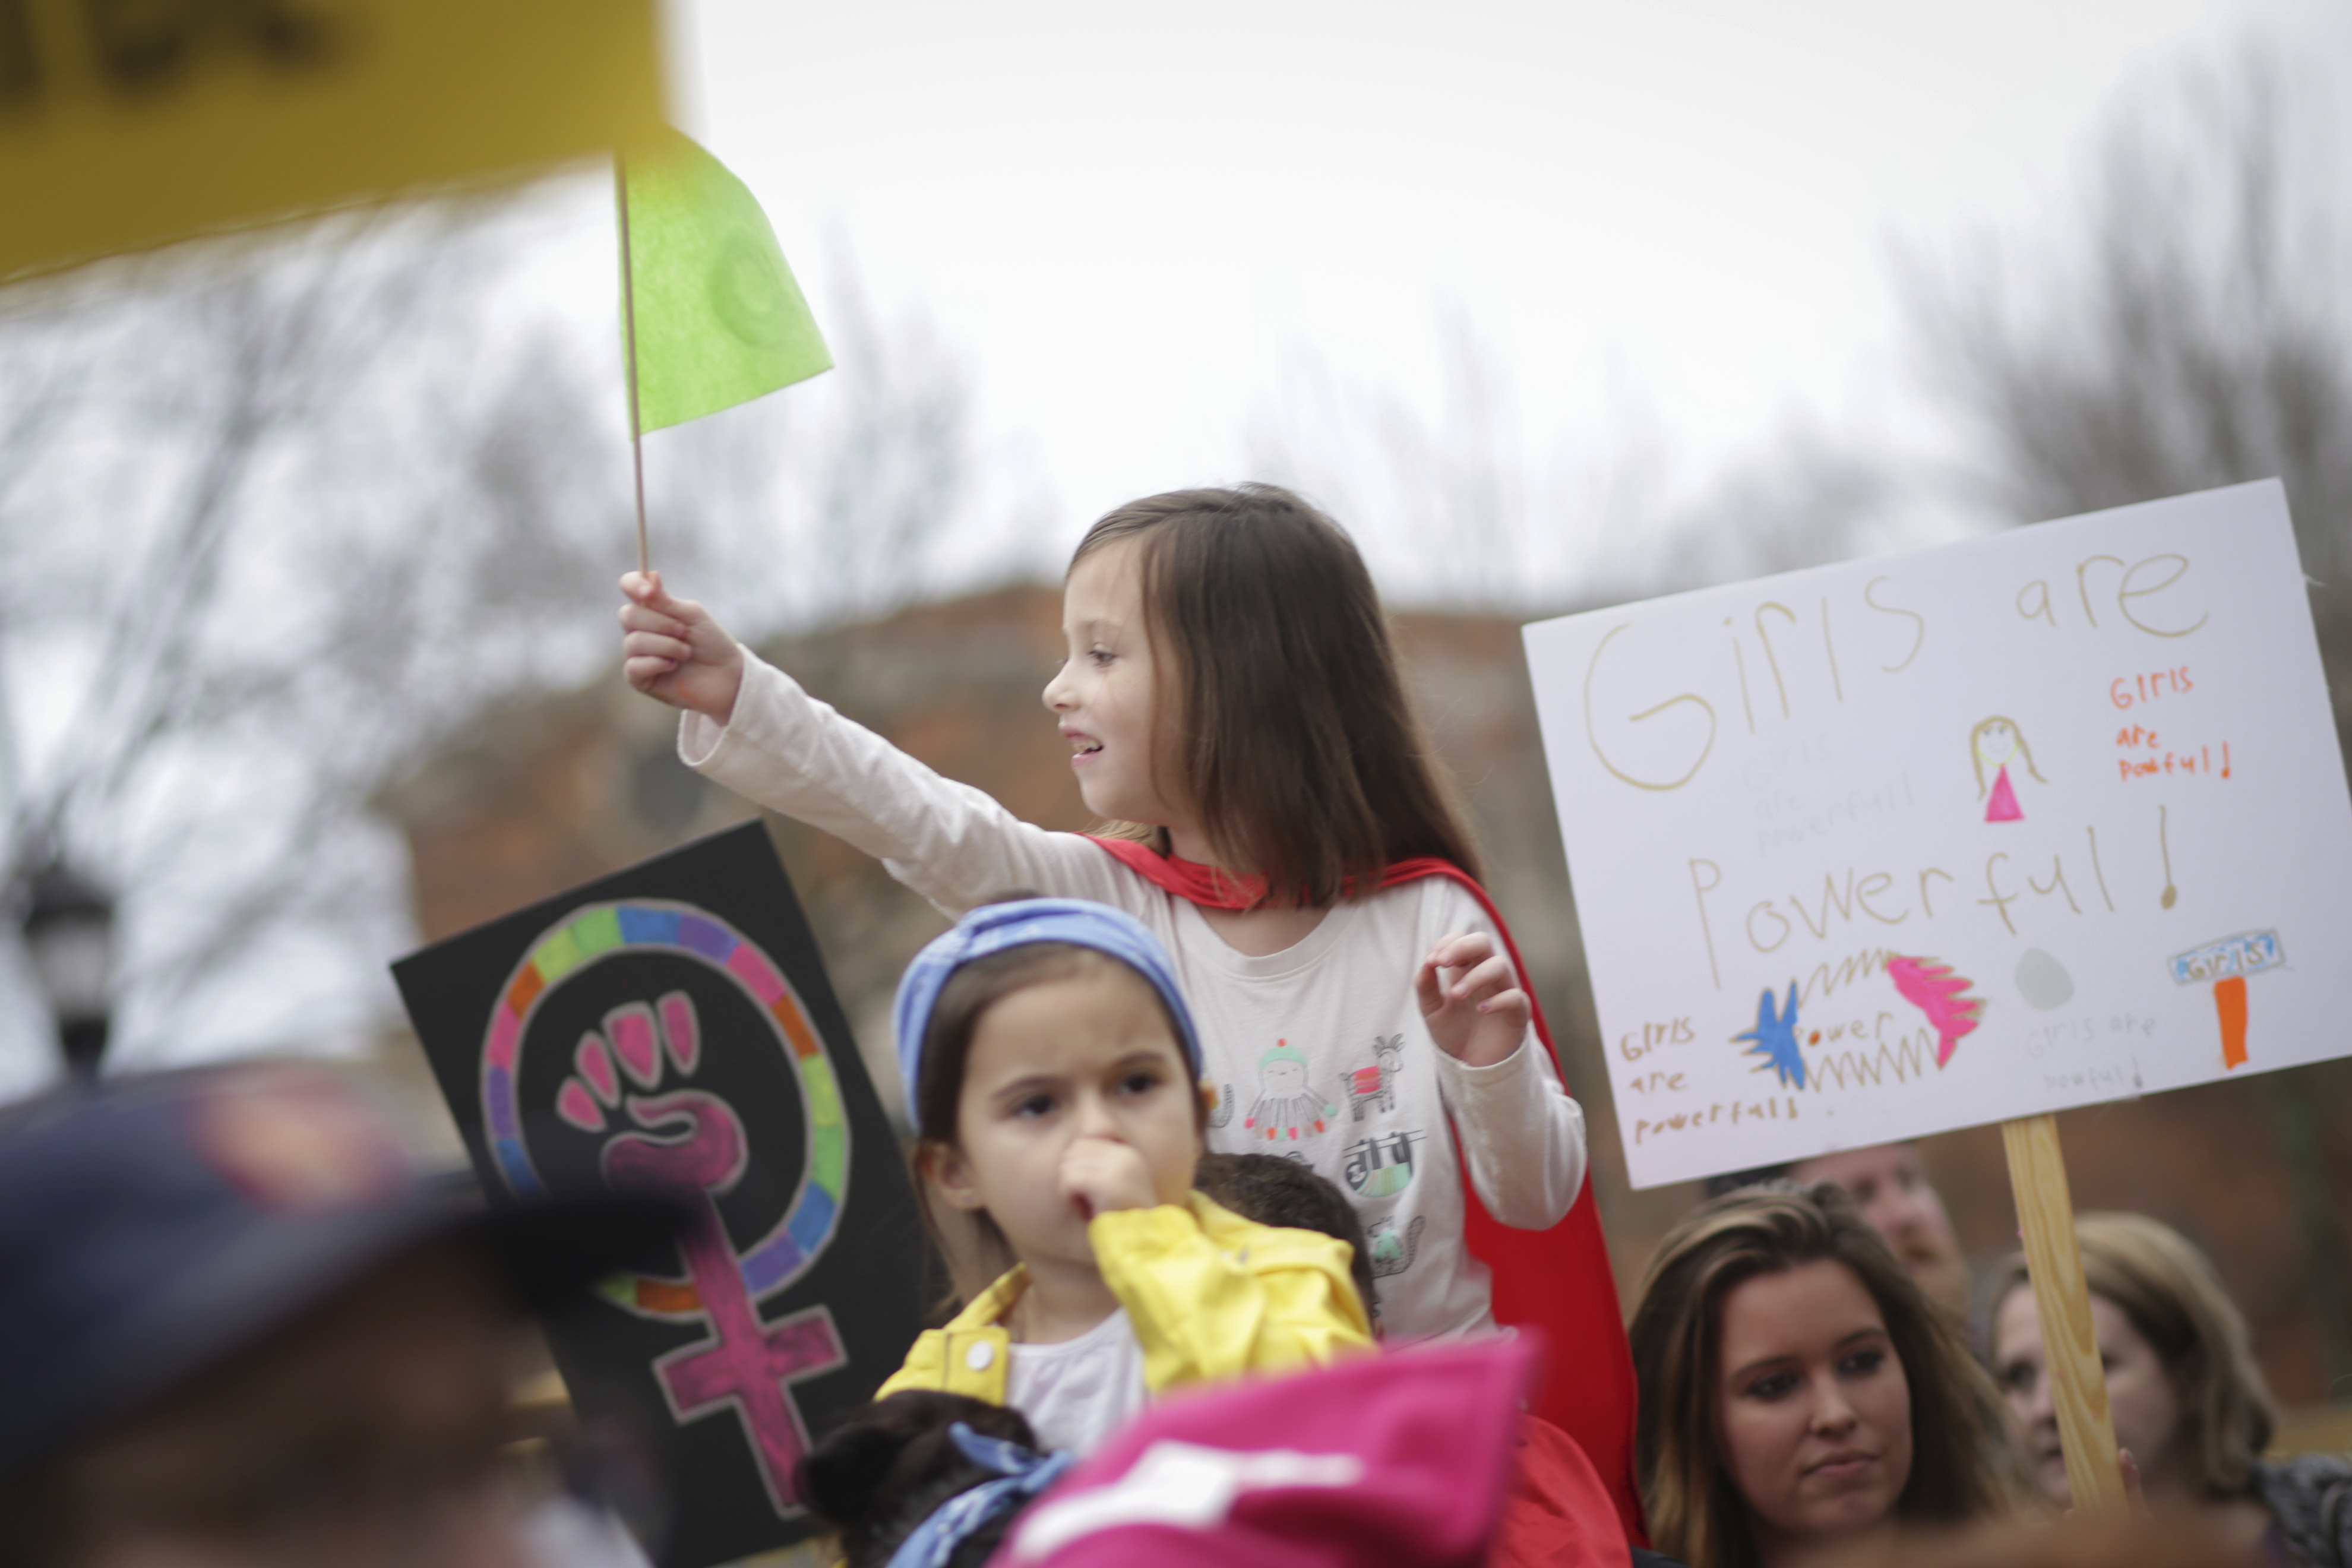 A young girl waves a flag during the Women's March in Athens, Ga., on Jan. 21, 2017 (John Roark—AP)